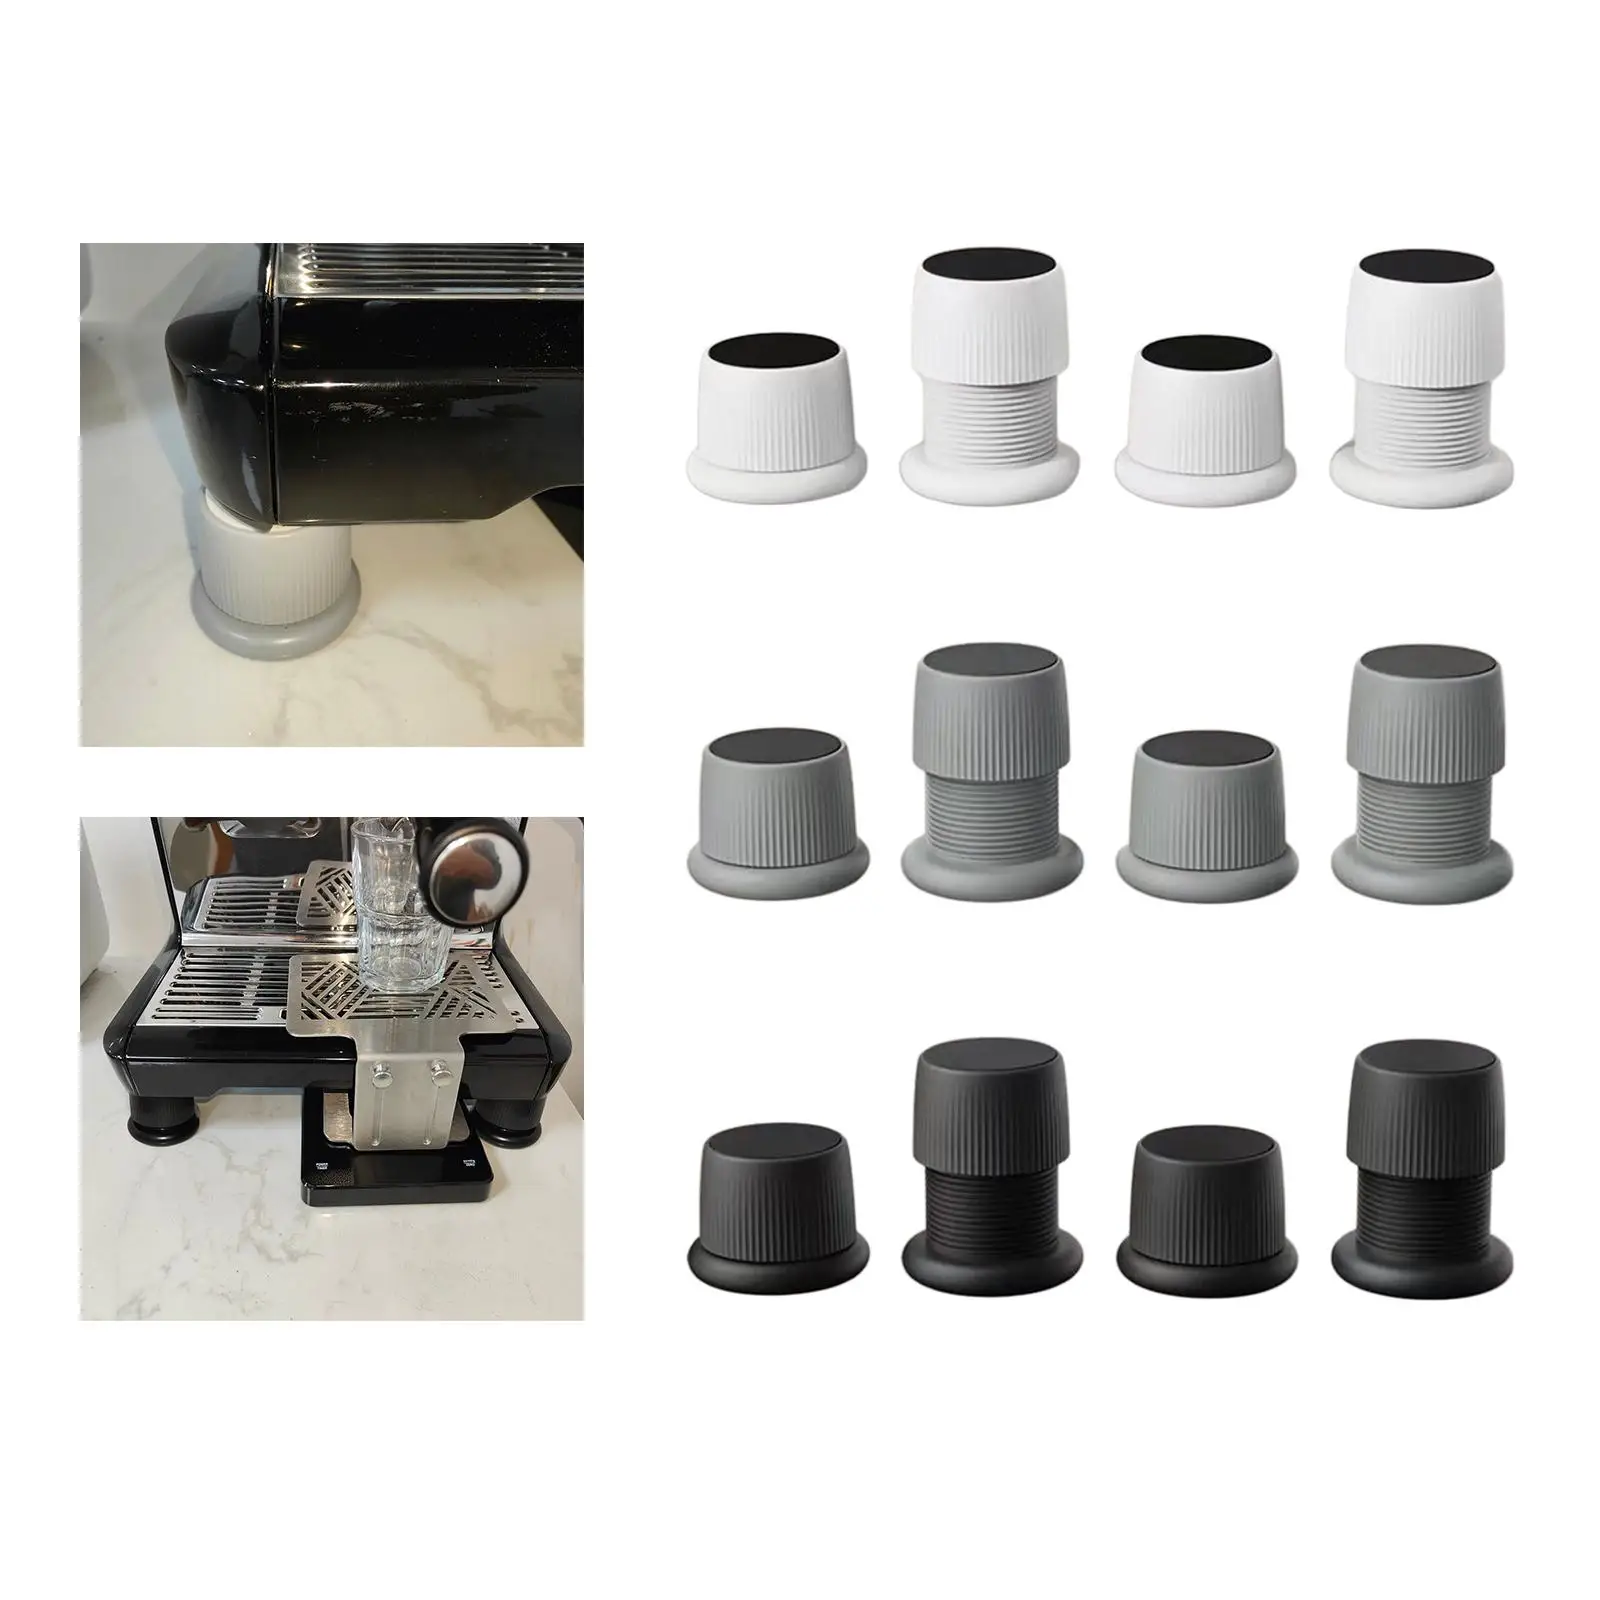 4x Heighten Plastic Isolation Feet Vibration Reduction Anti Vibration Pads Support Protects Pedestals for Espresso Machine